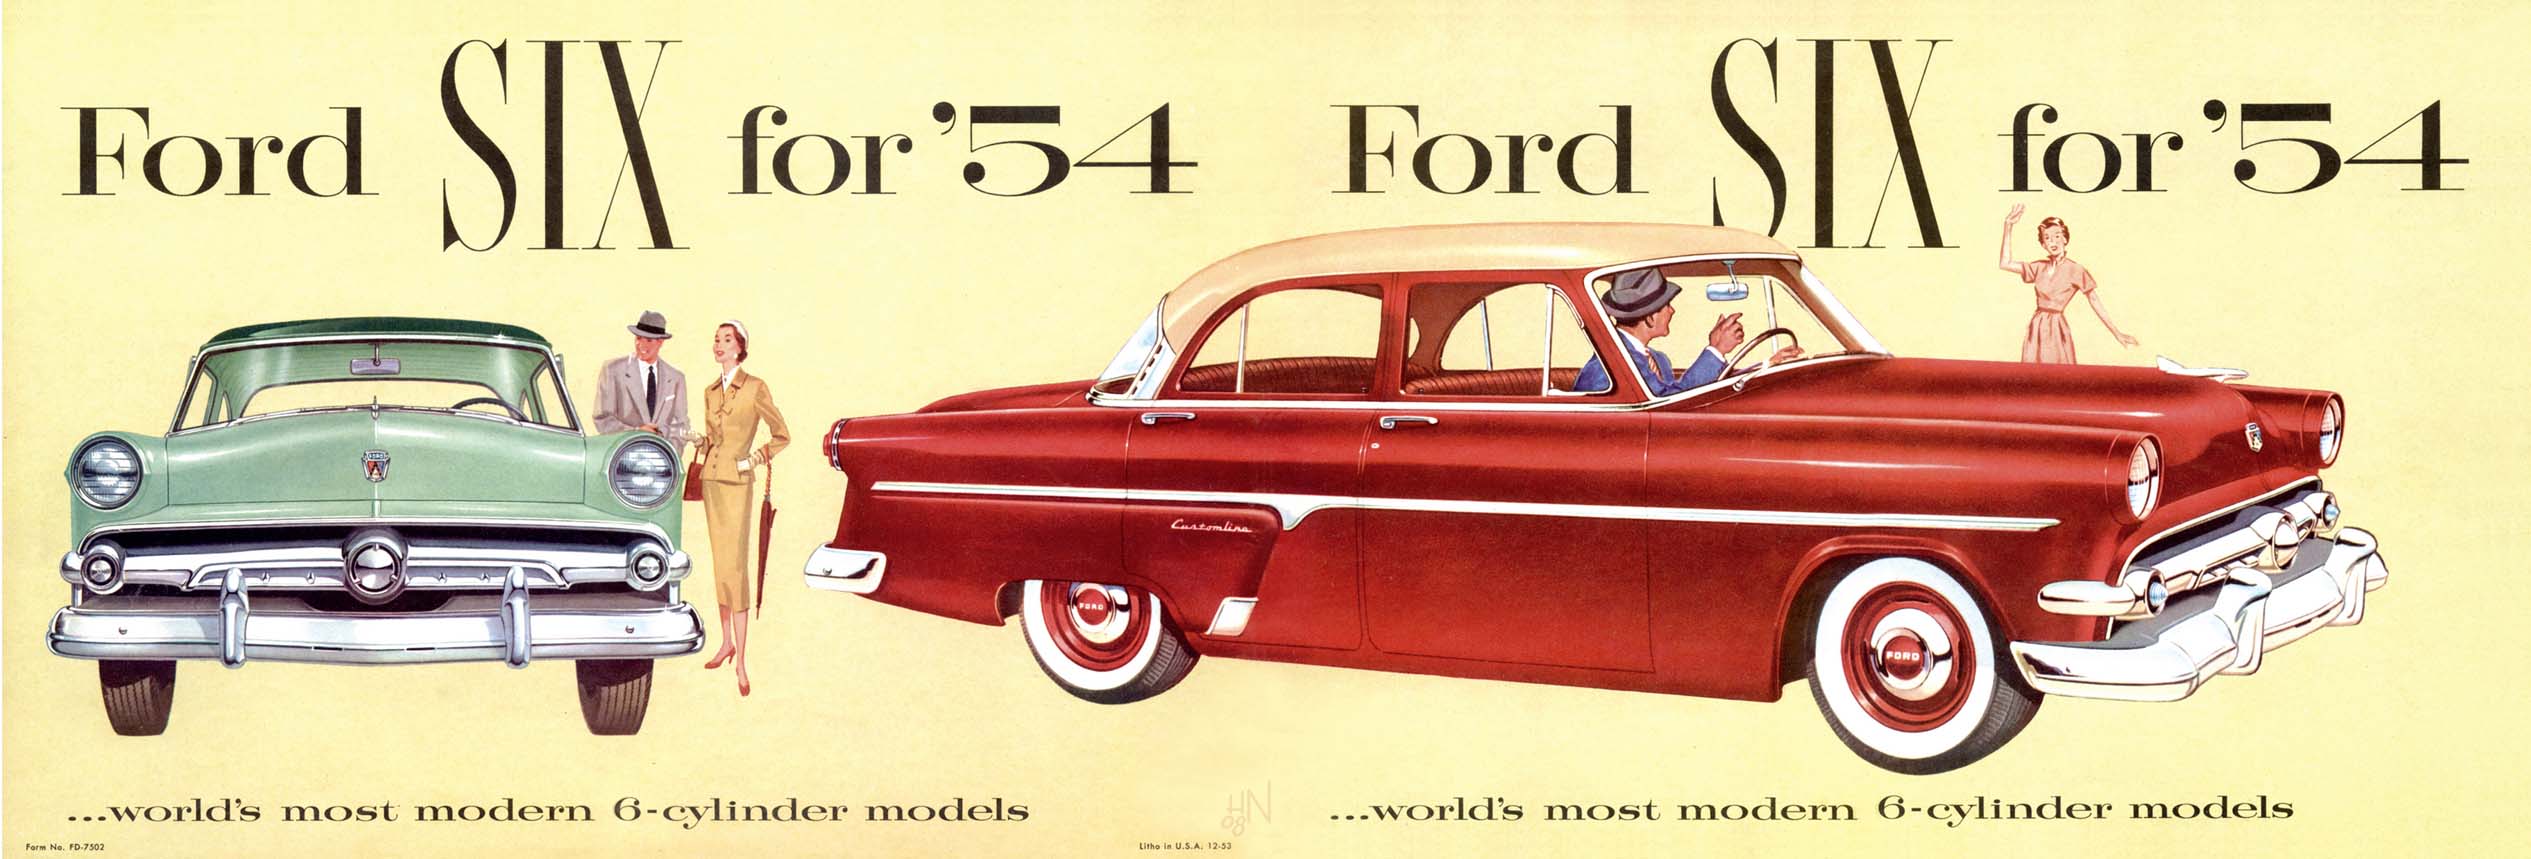 1954 Ford Six Brochure Page 3